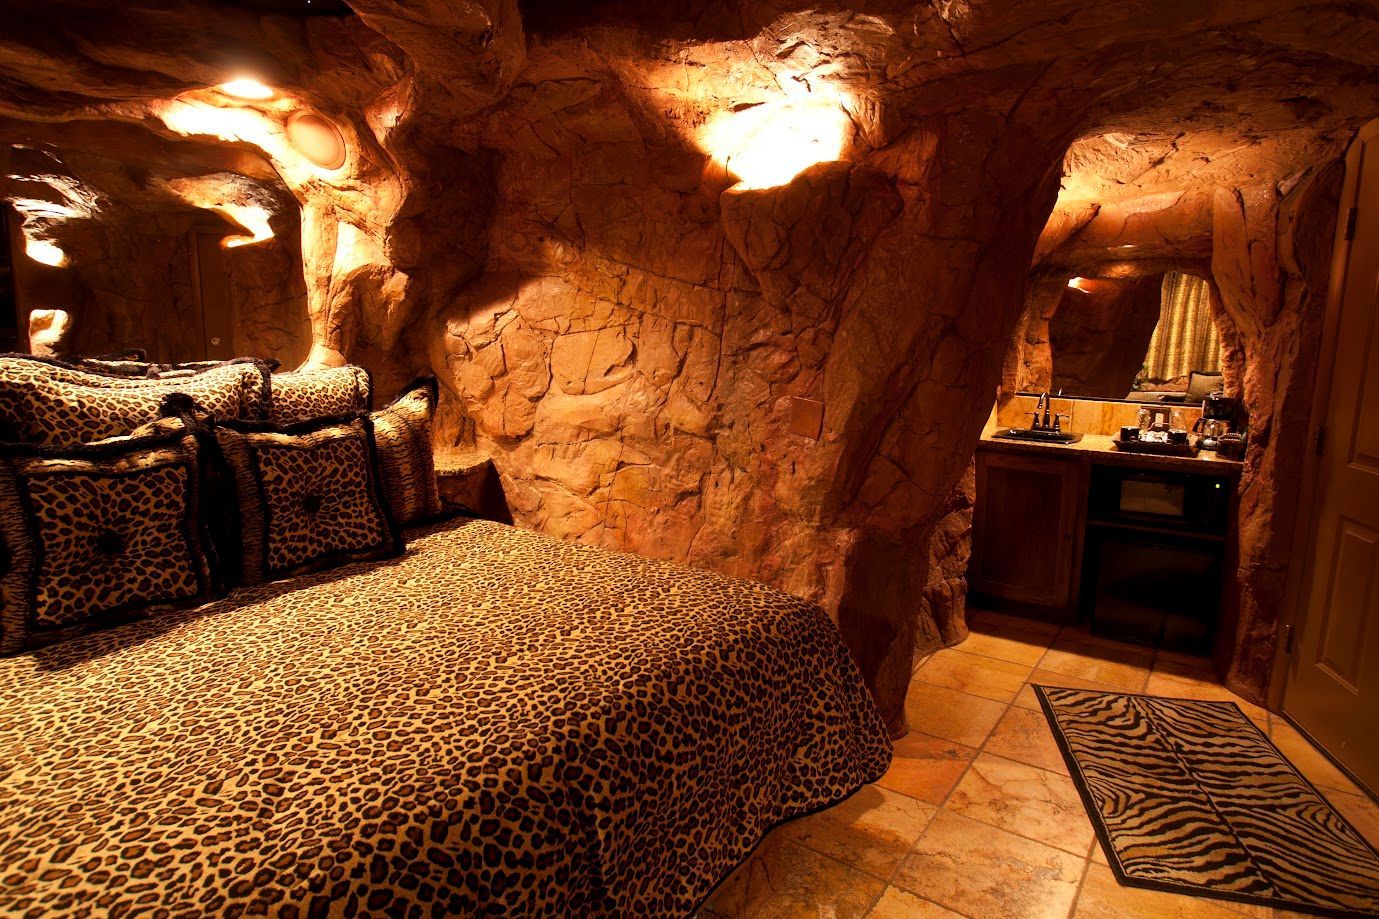 A bedroom in a cave with a leopard print bed